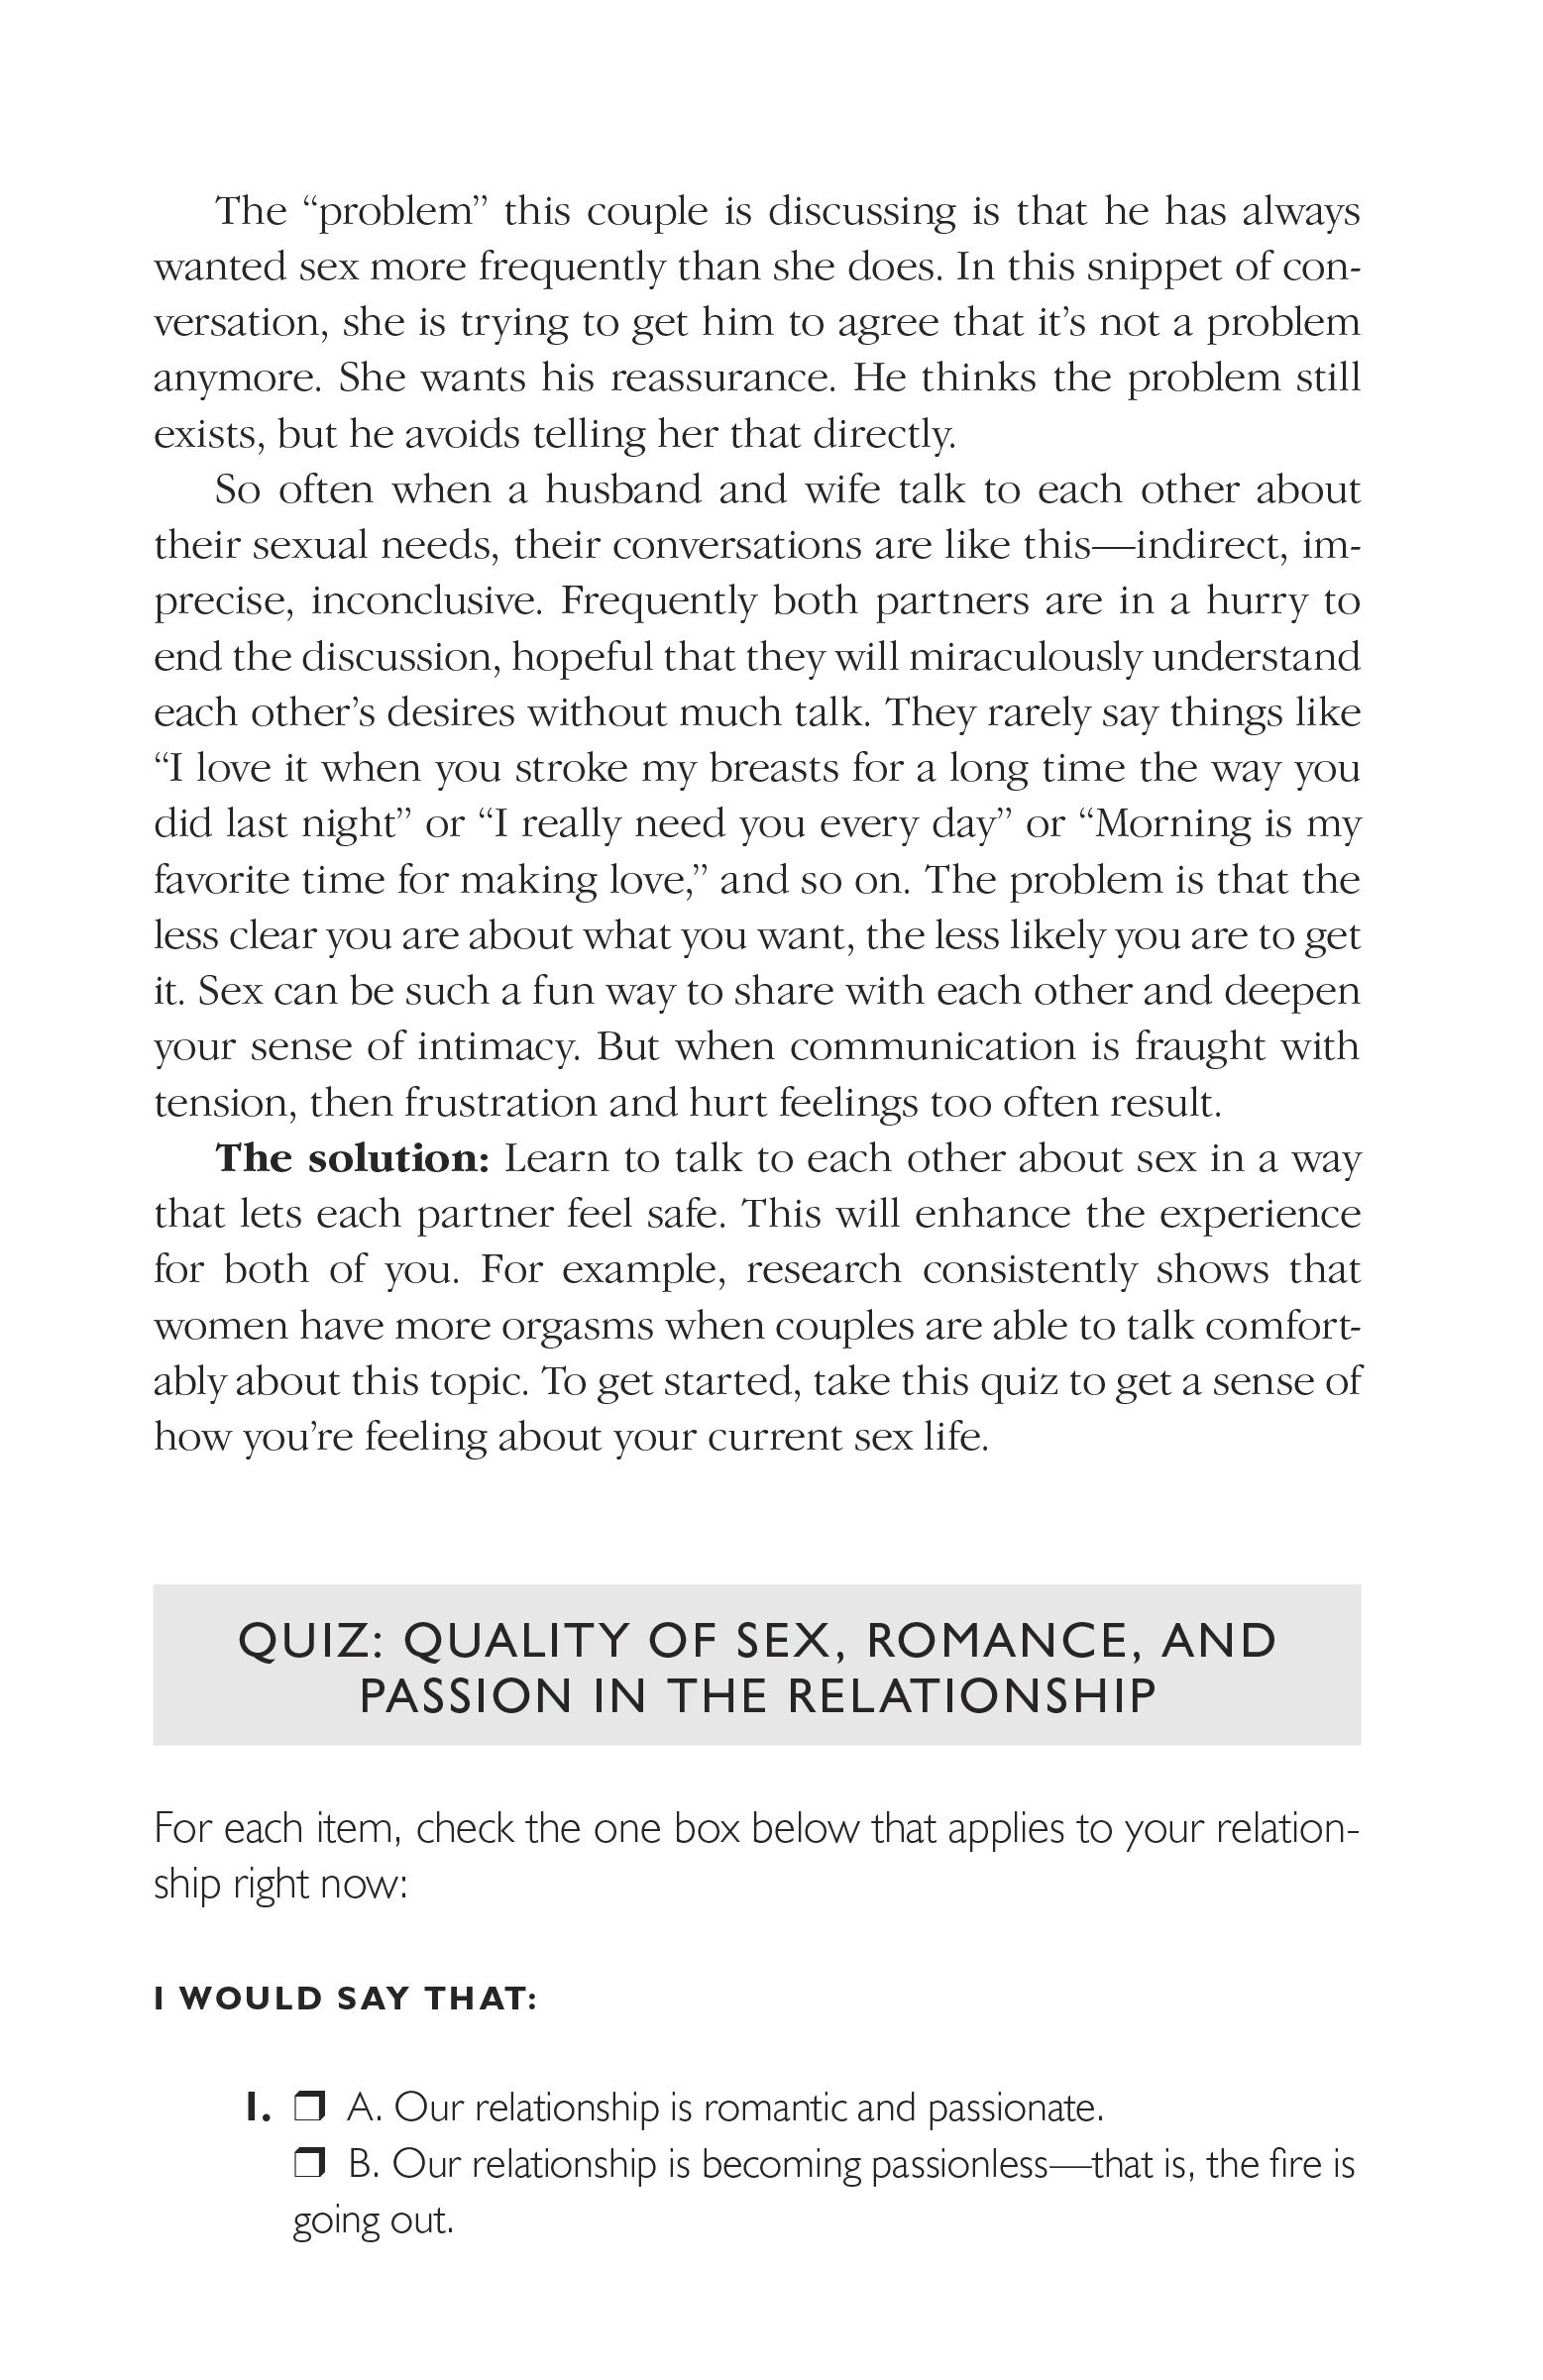 Extended ebook content for The Seven Principles for Making Marriage Work Quiz Quality Of Sex, Romance, and Passion in the Relationship pic